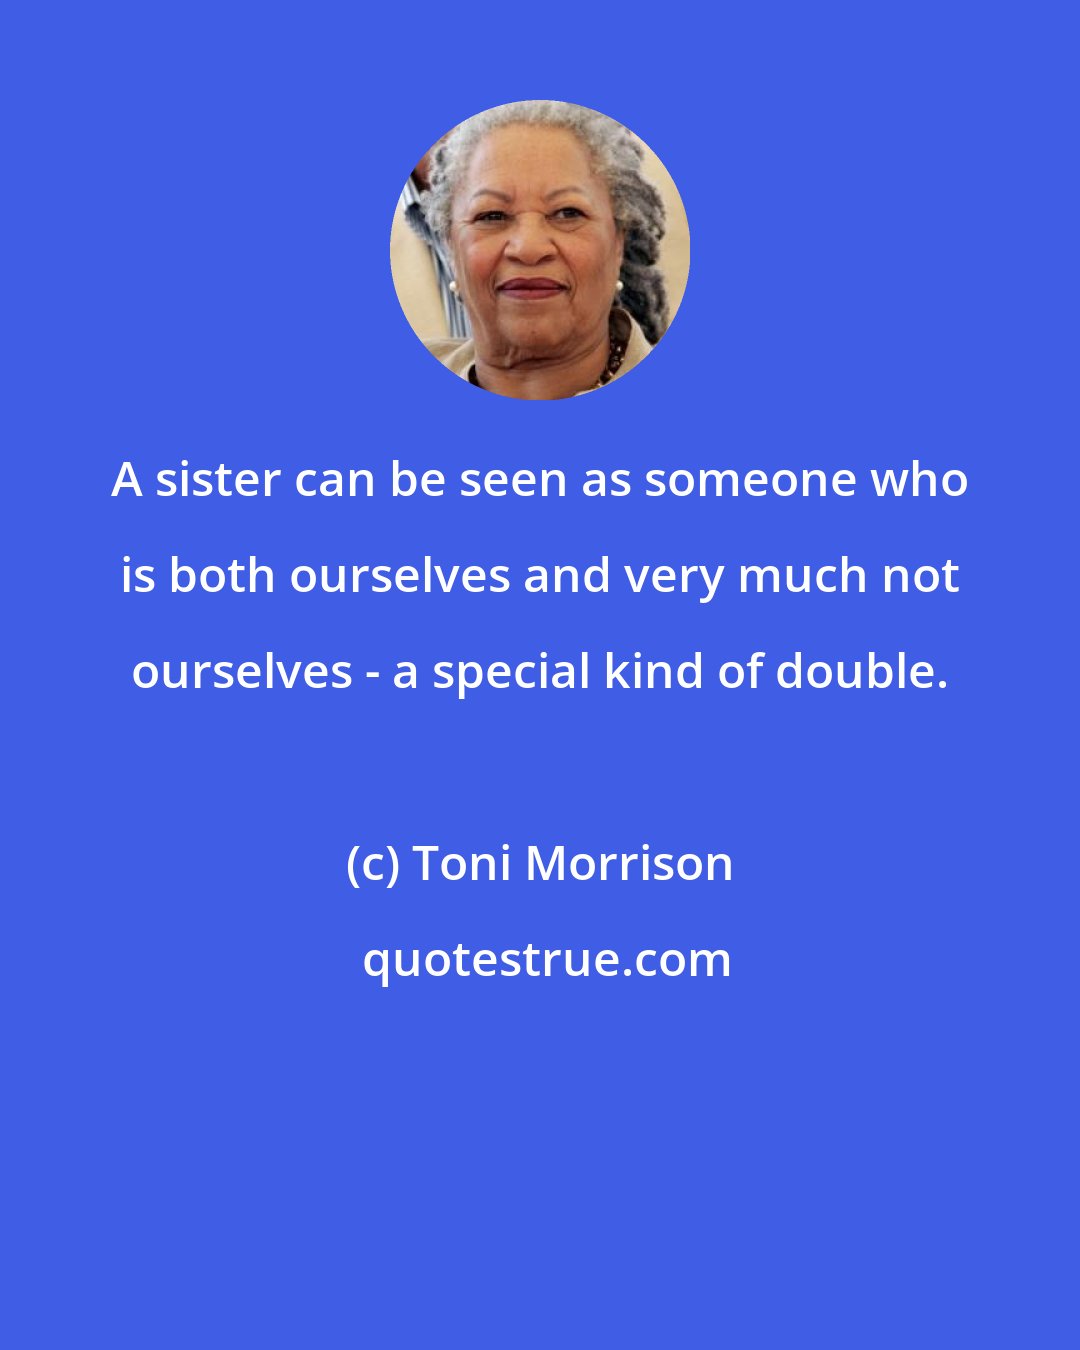 Toni Morrison: A sister can be seen as someone who is both ourselves and very much not ourselves - a special kind of double.